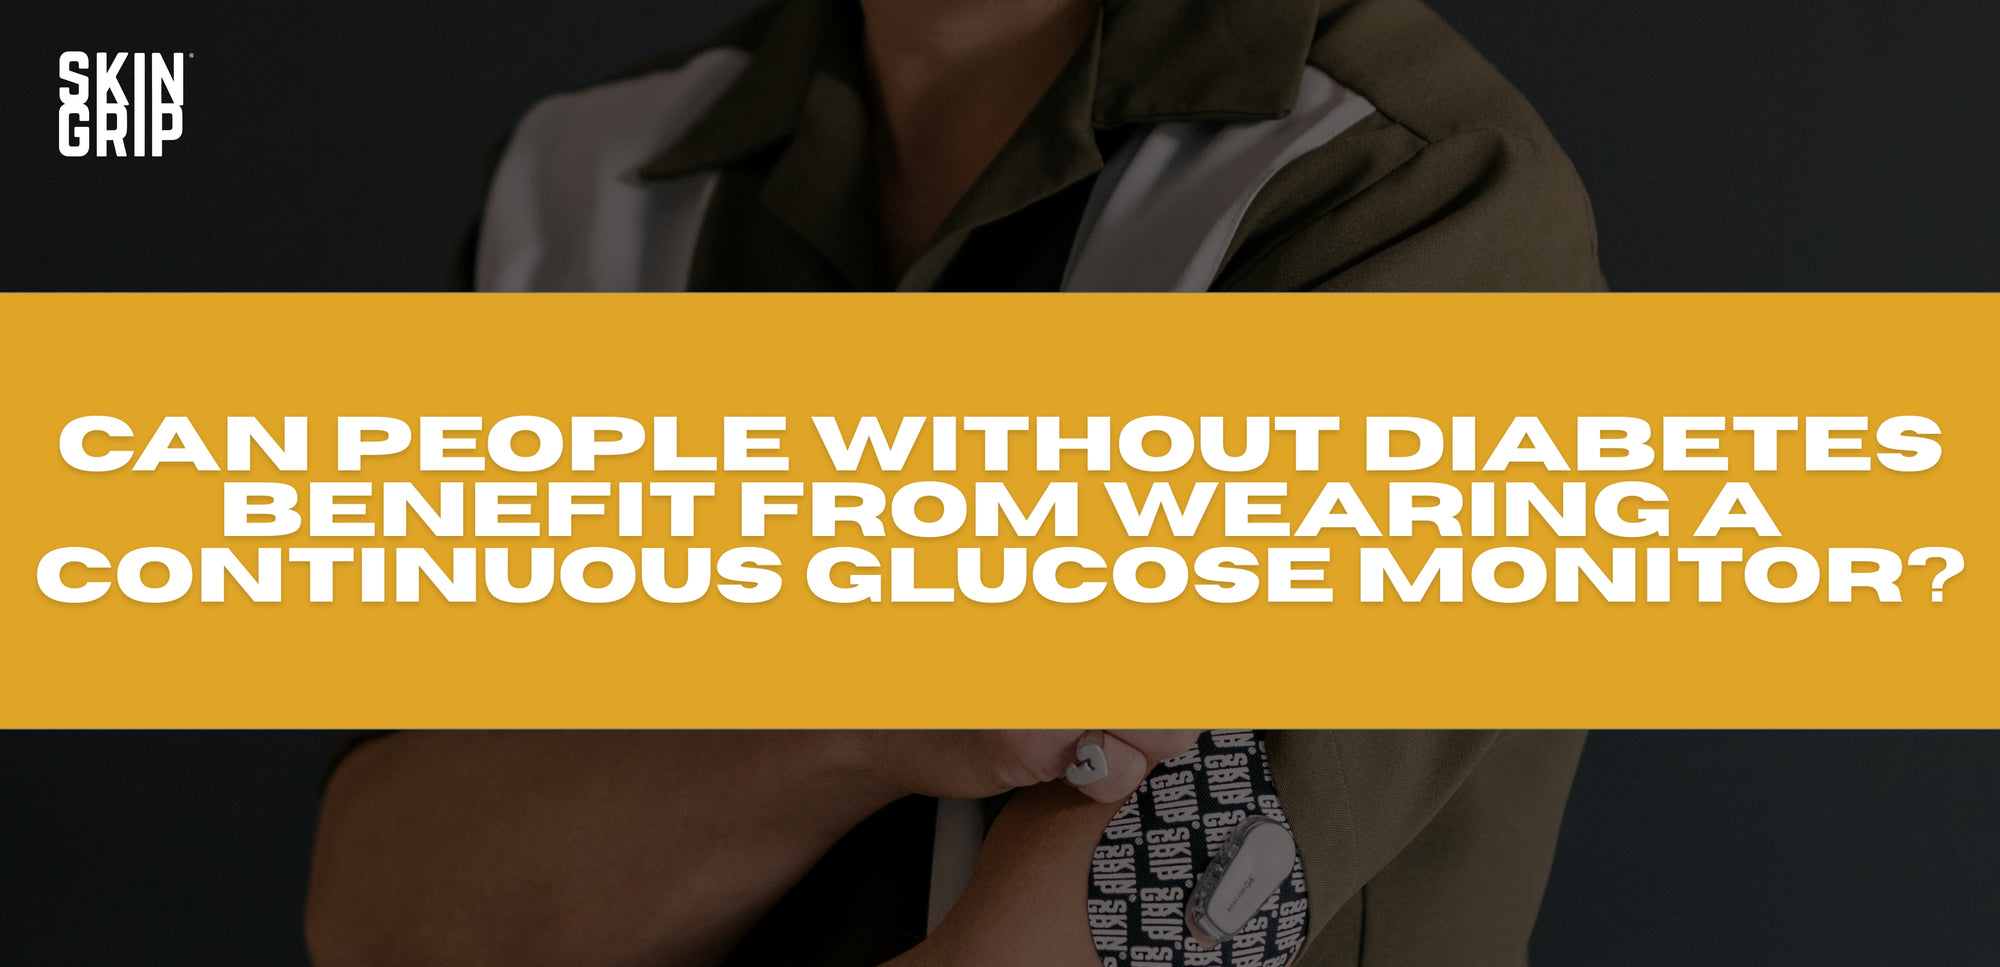 Can People Without Diabetes Benefit From Wearing a Continuous Glucose Monitor?